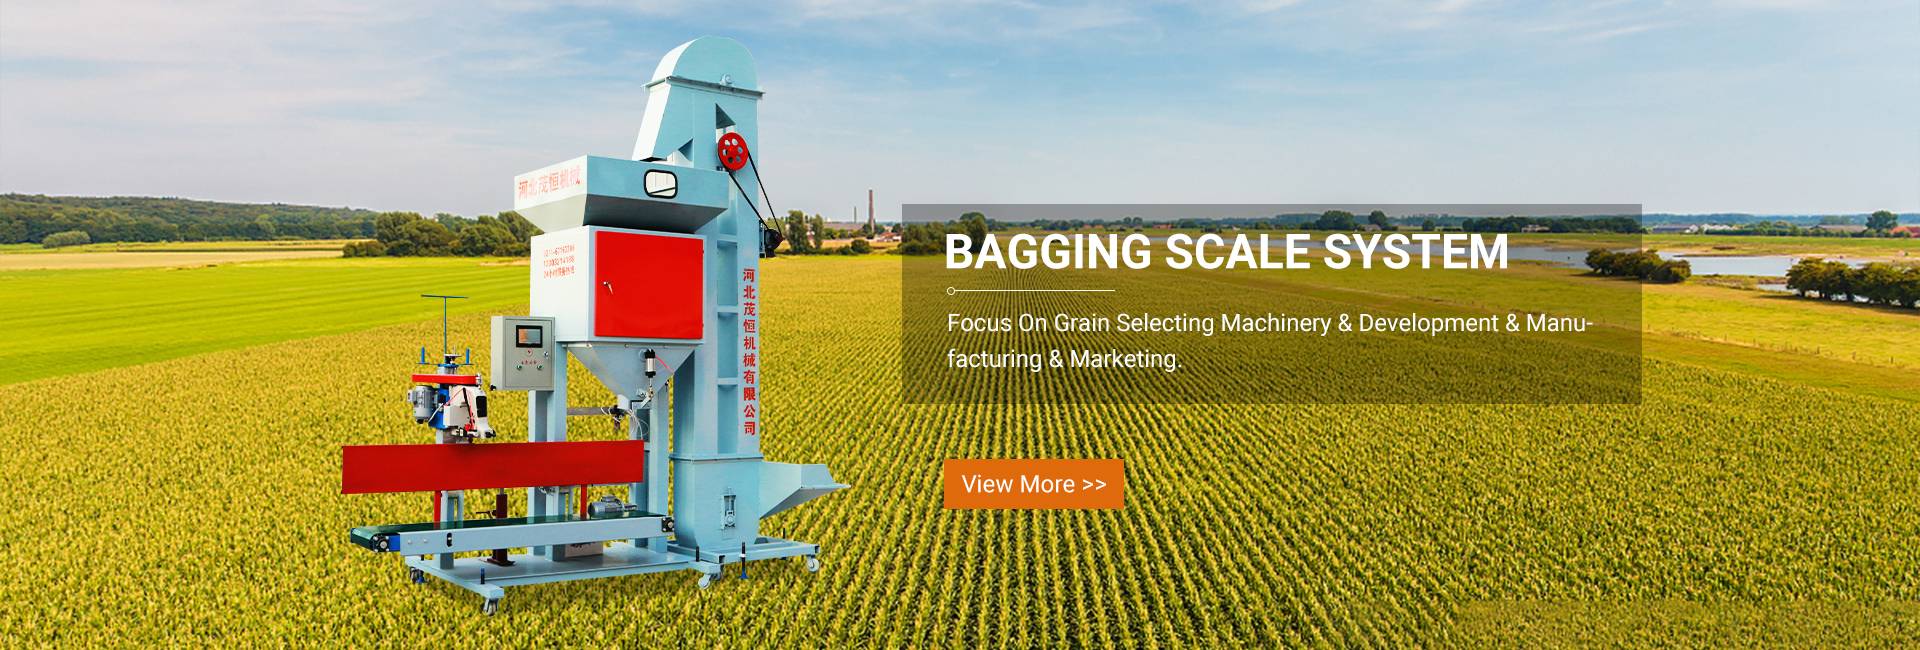 Bagging scale system 